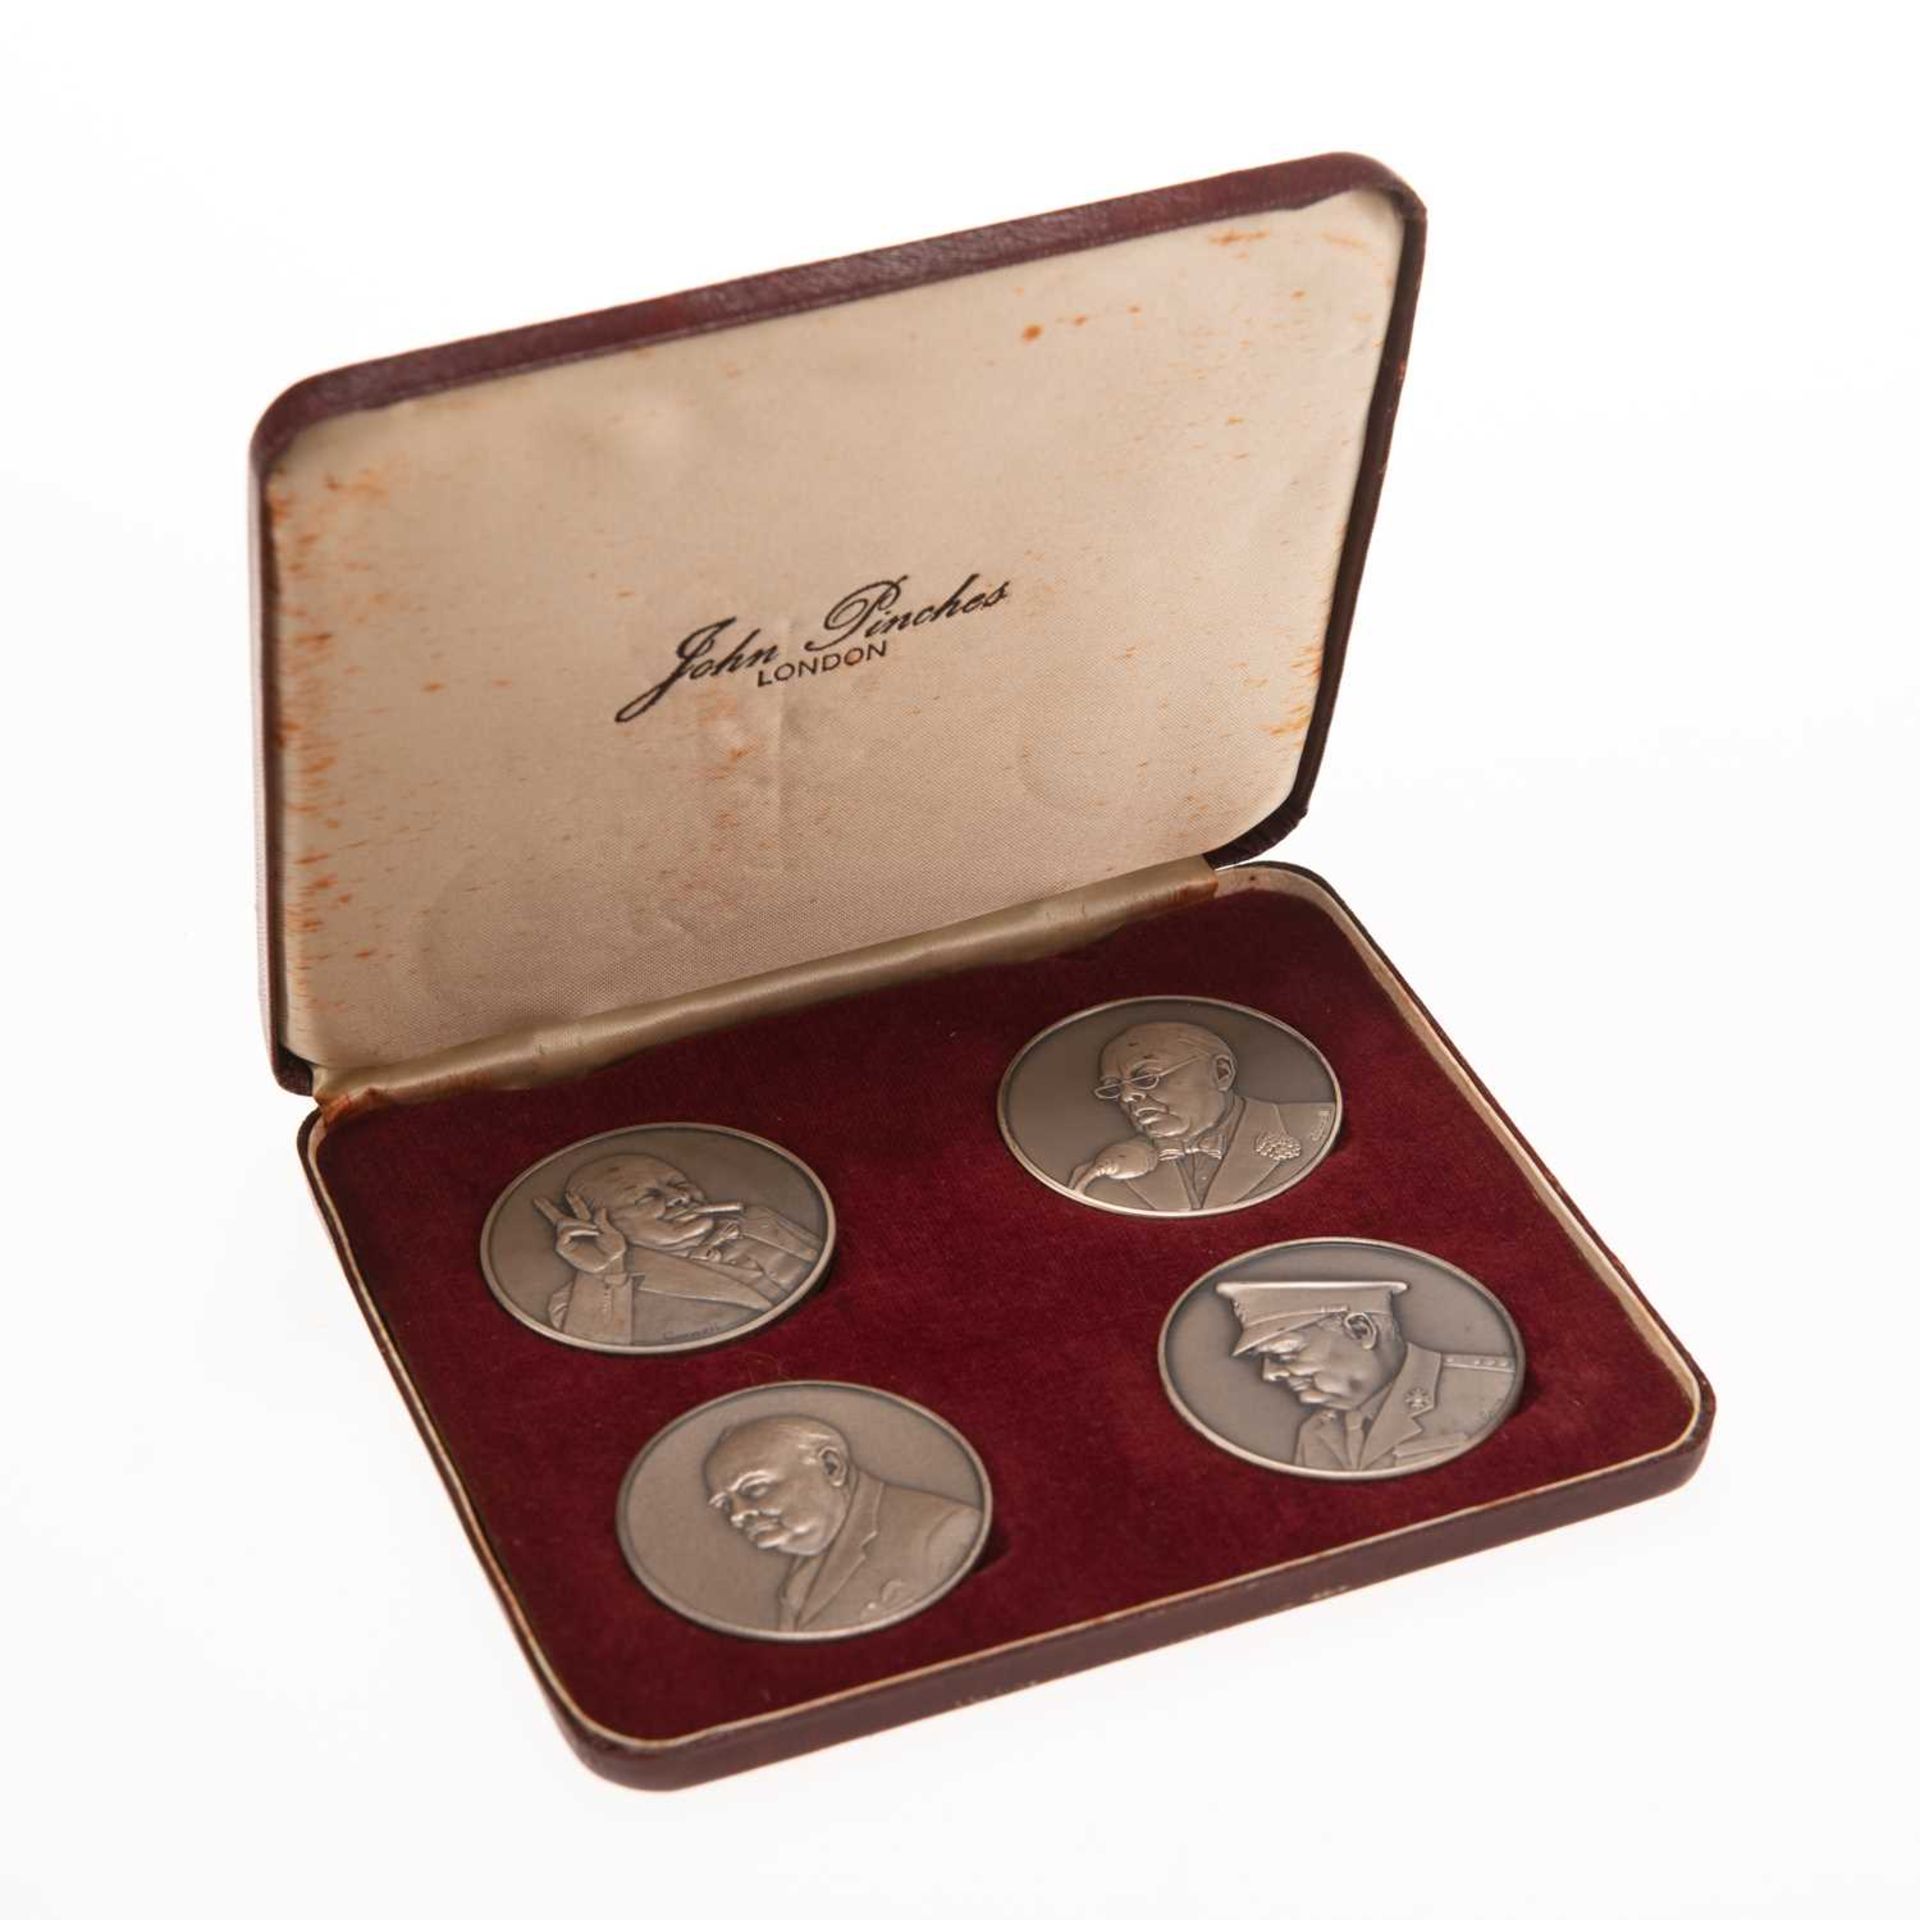 A CASED SET OF FOUR JOHN PINCHES STERLING SILVER MEDALS, 'THE CHURCHILL MEDALS'